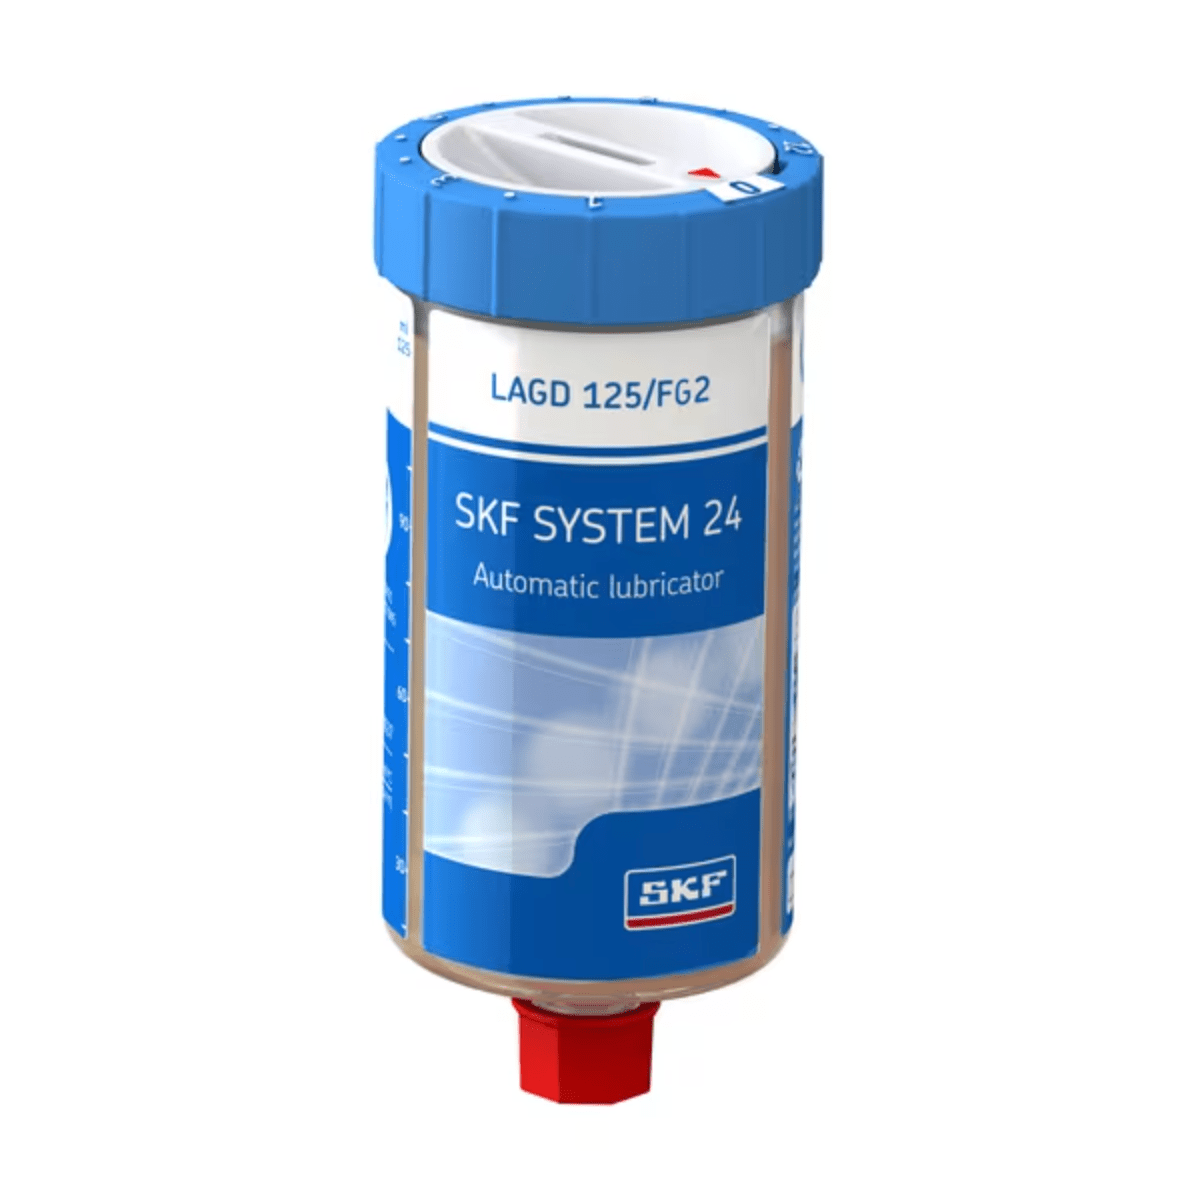 SKF LAGD 125/FG2 Automatic lubricator with LGFG 2 Food grade, general purpose grease, 125ml - Apollo Industries llc